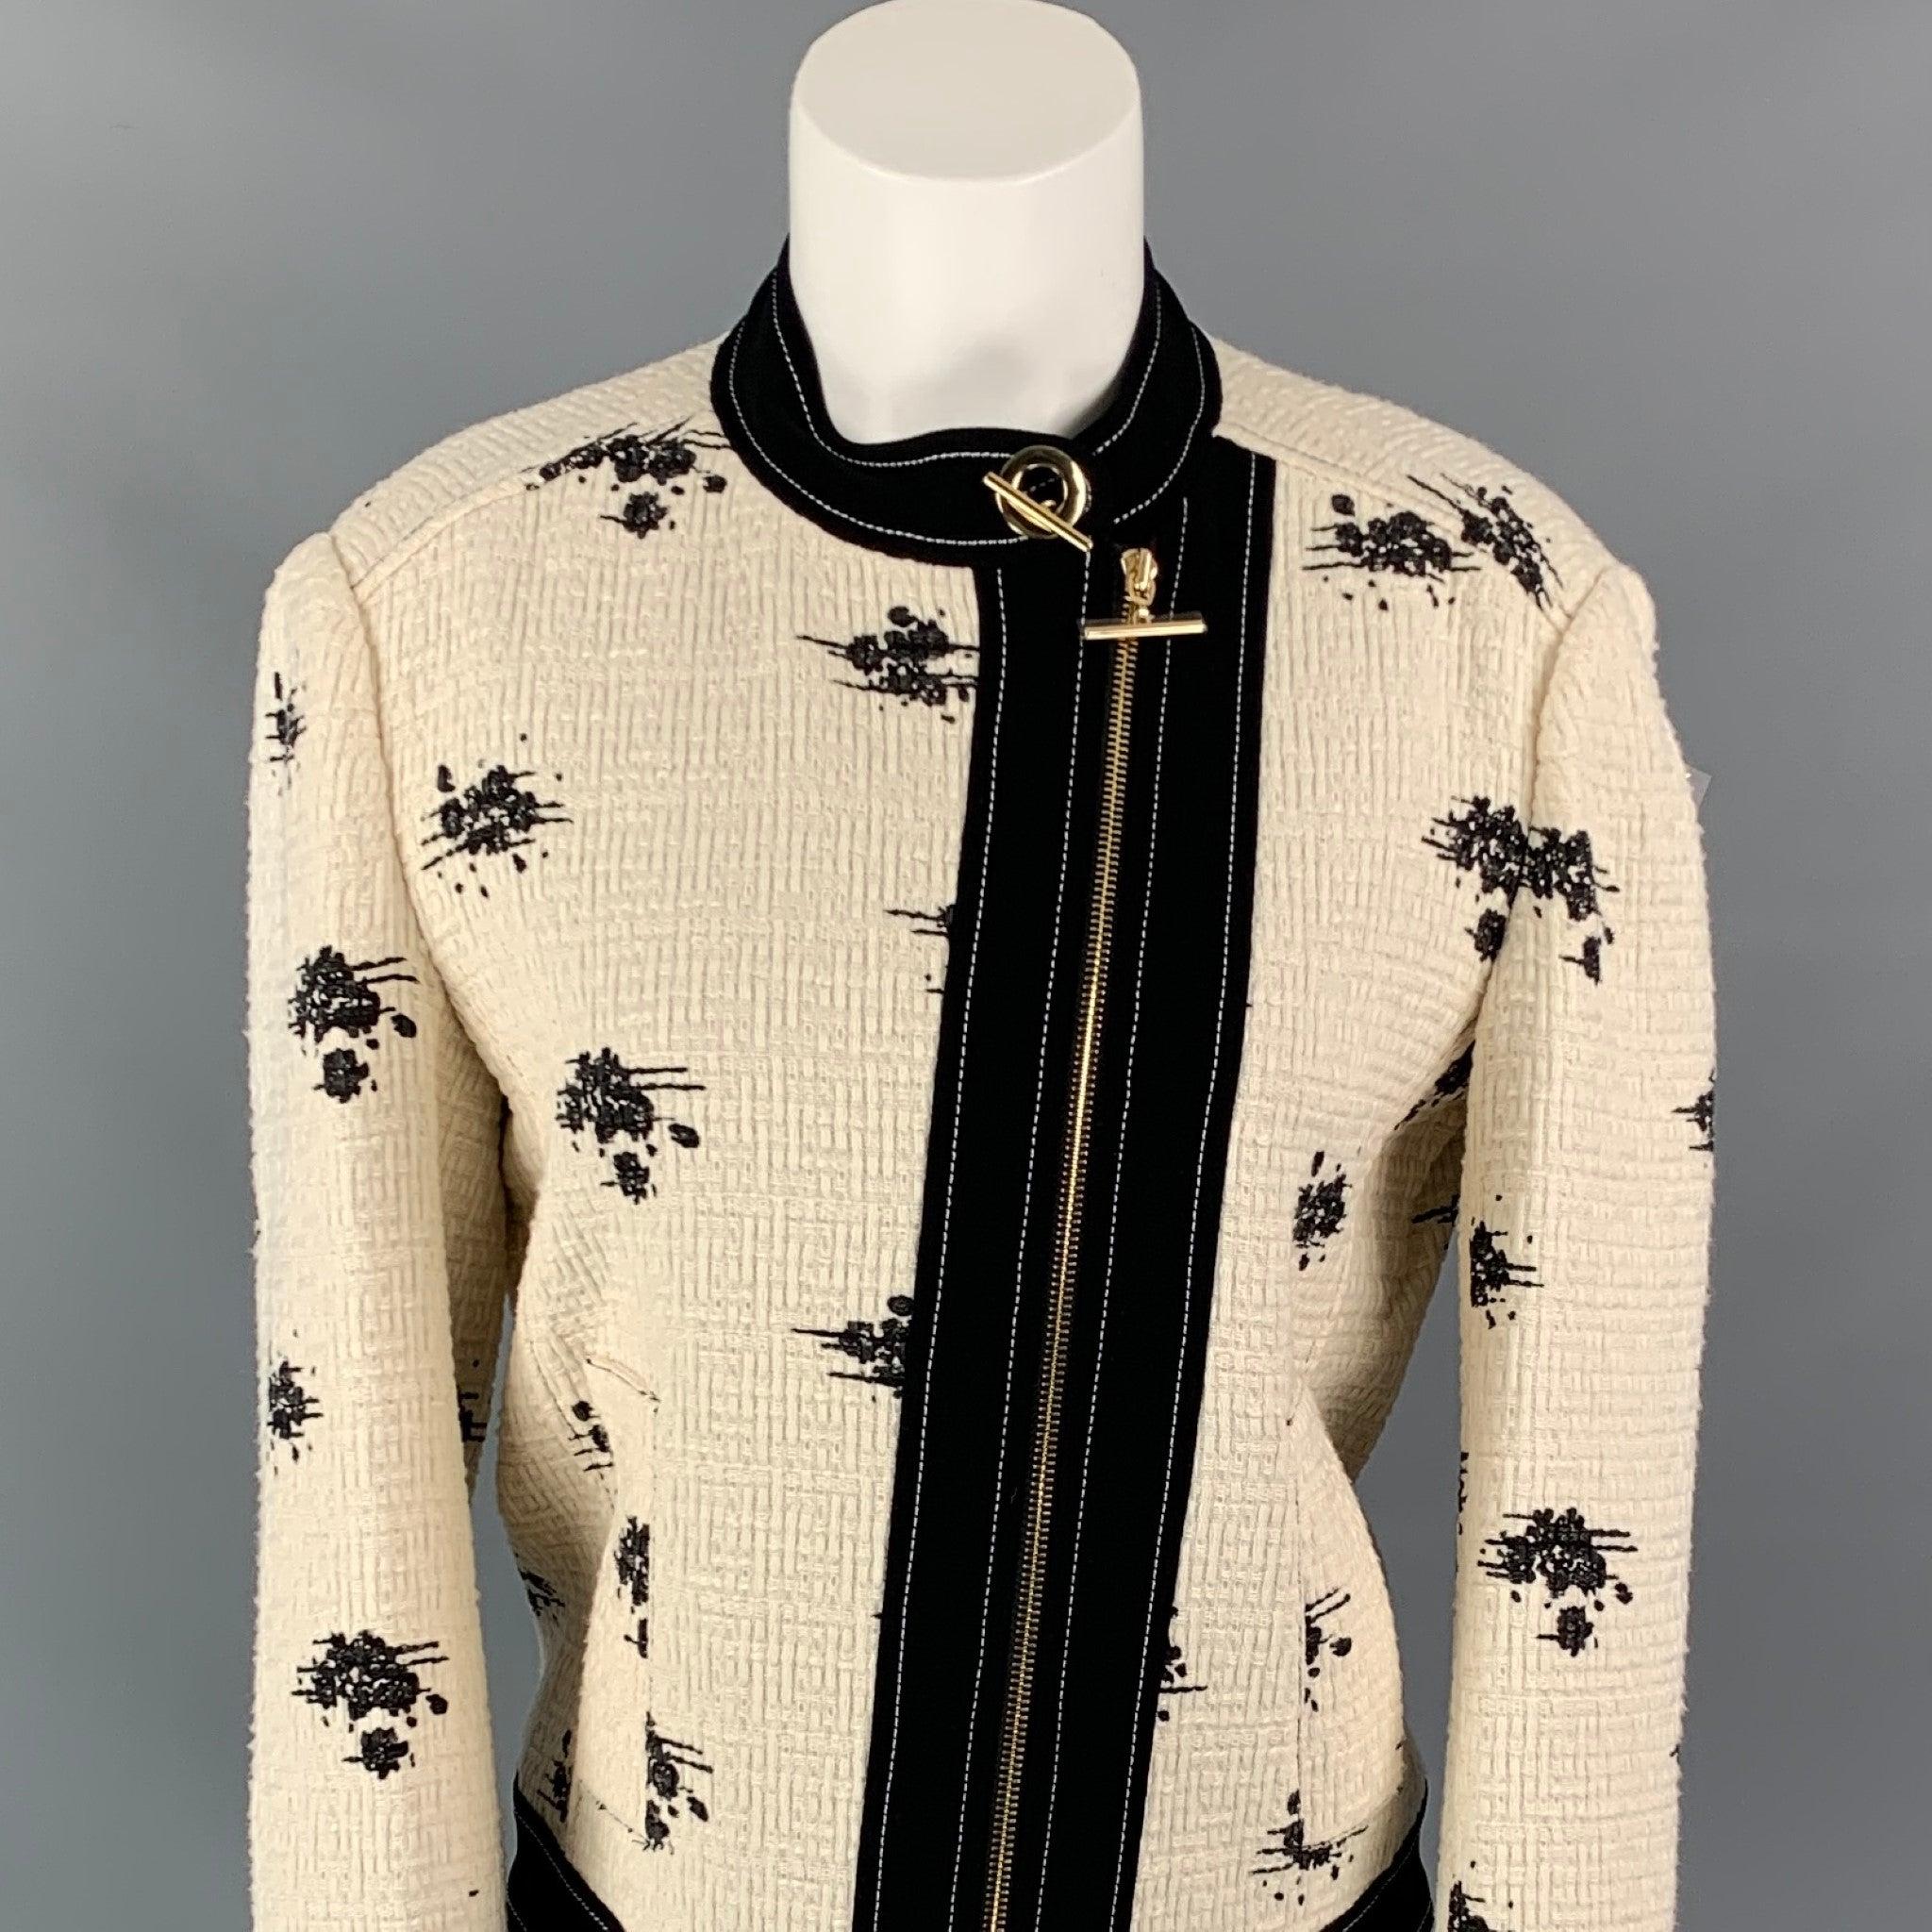 DEREK LAM jacket comes in white & black marbled boucle cotton featuring gold tone hardware, contrast stitching, slit pockets, and a full zip closure.
New With Tags.
 

Marked:   6 

Measurements: 
 
Shoulder: 16.5 inches  Bust: 38 inches  Sleeve: